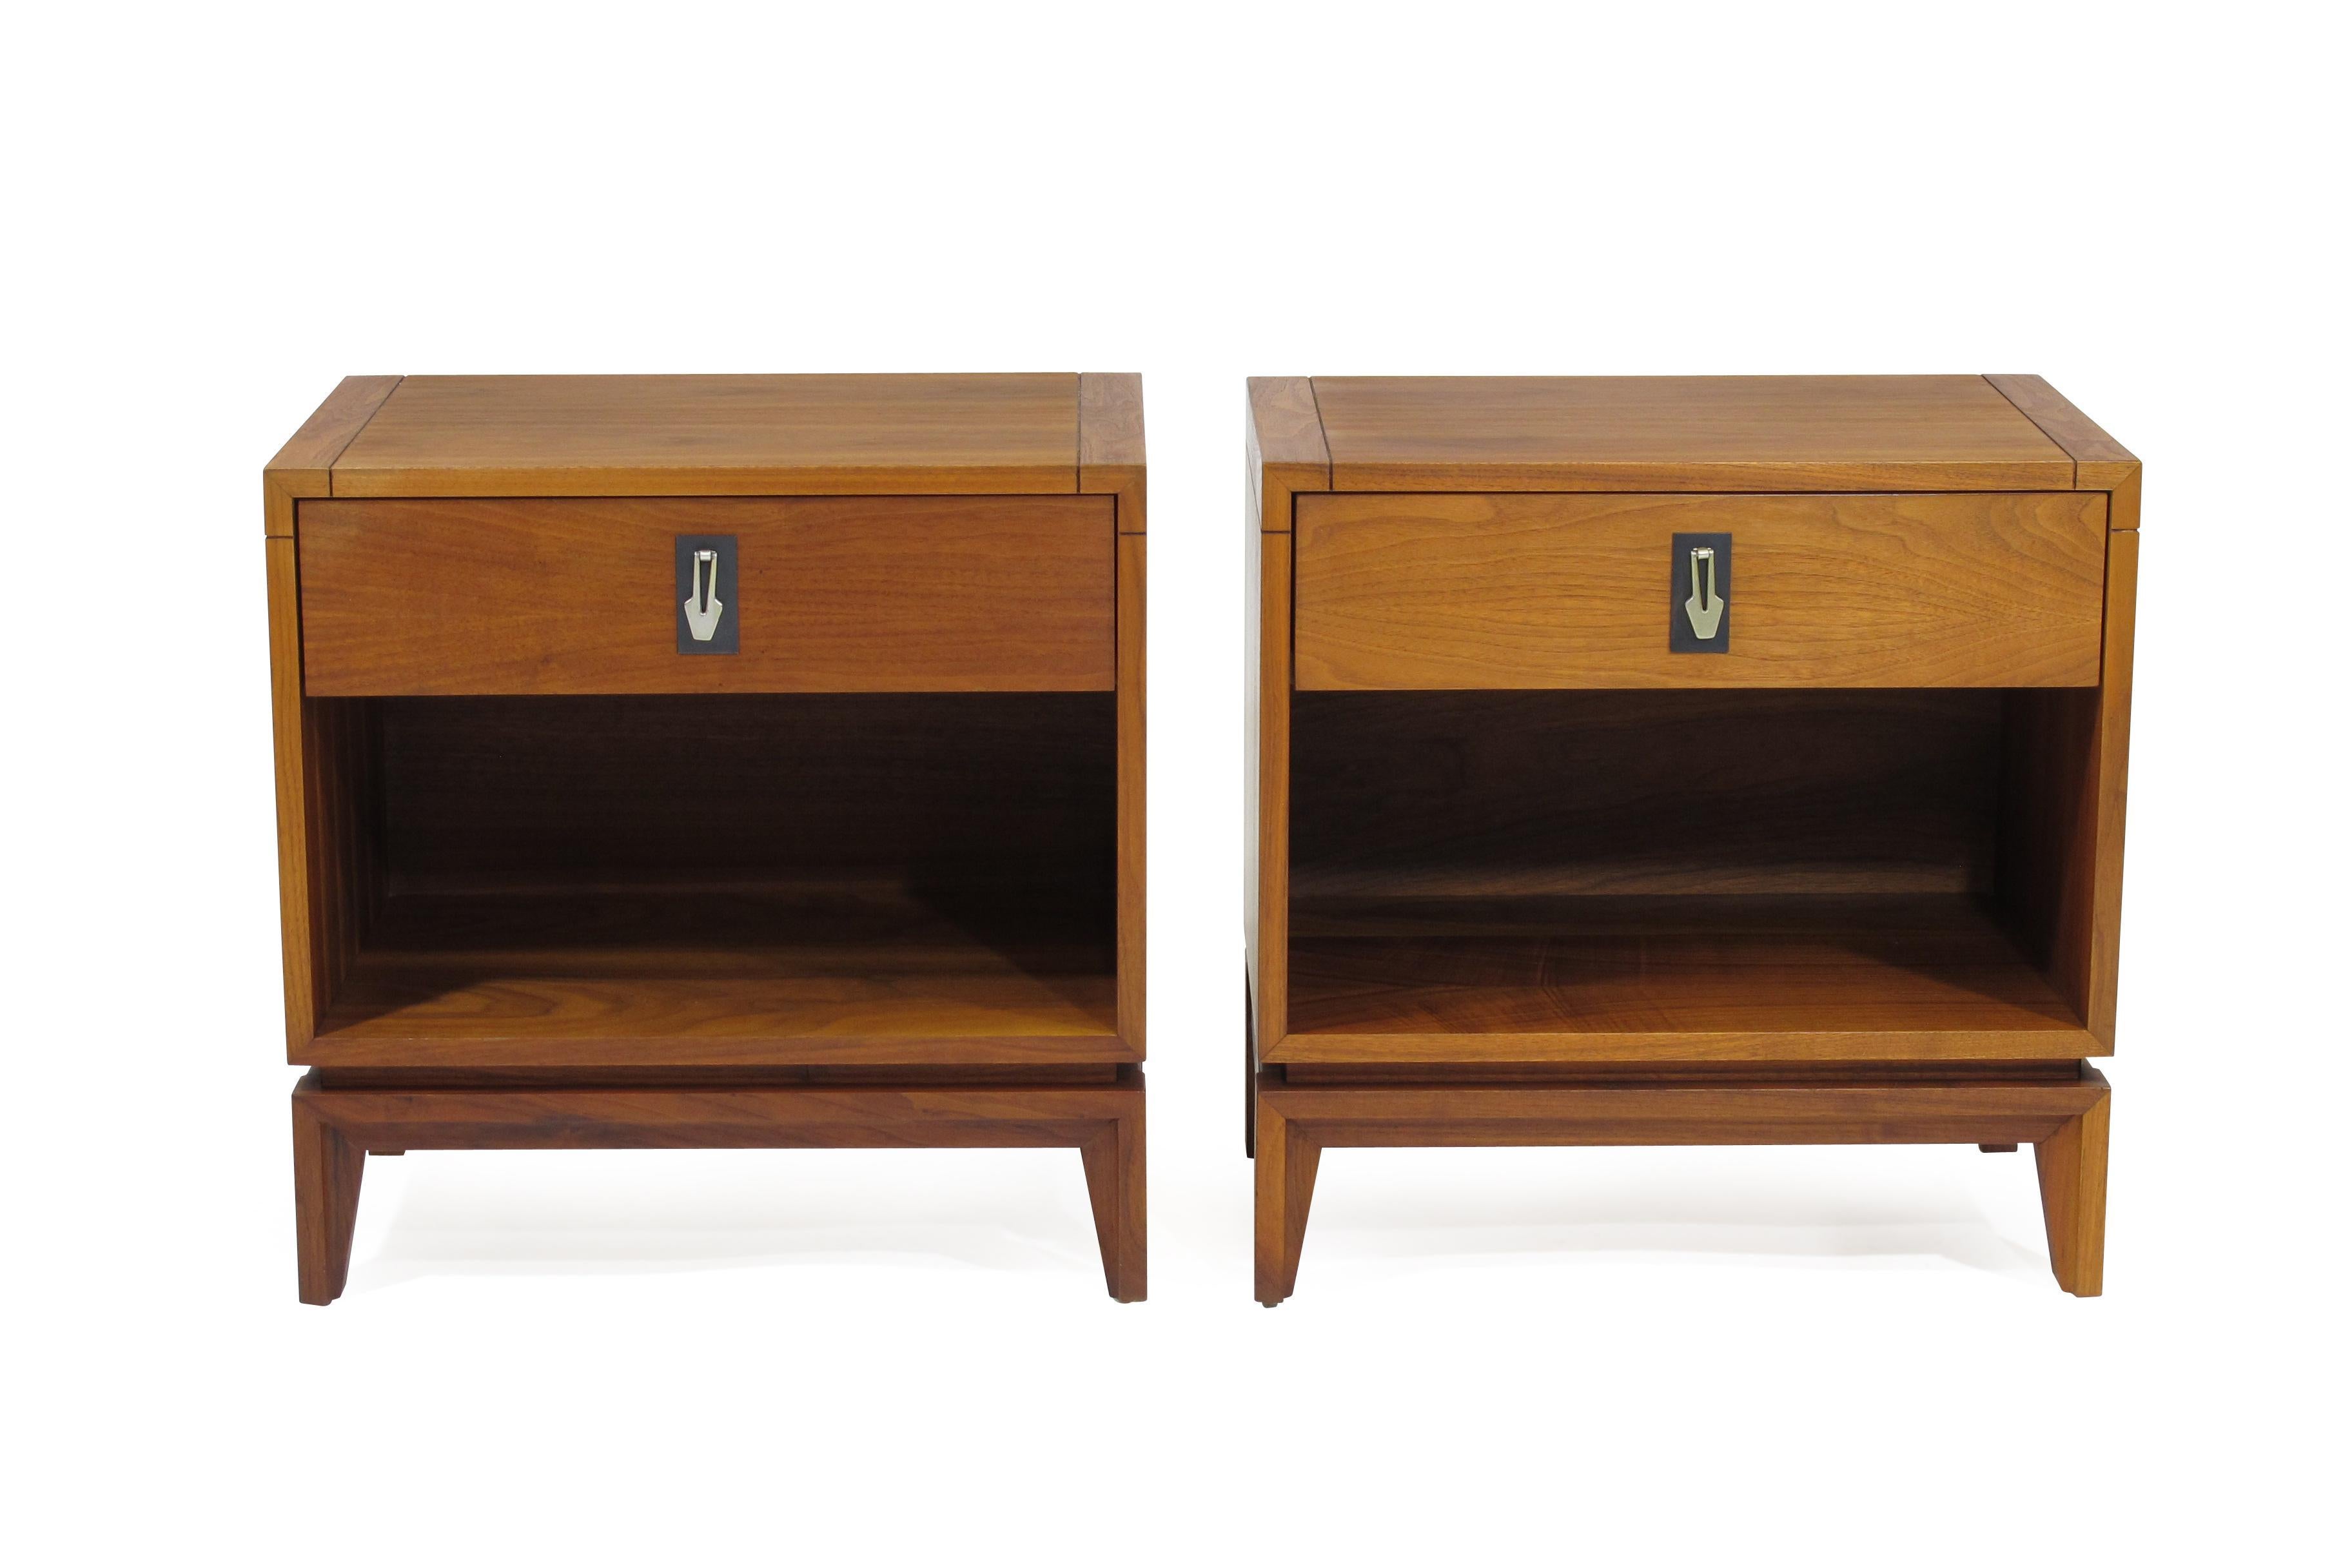 Midcentury walnut nightstands by Brown Saltman. One-drawer with metal drop-pull over an open space for storage, raised on tapered legs.